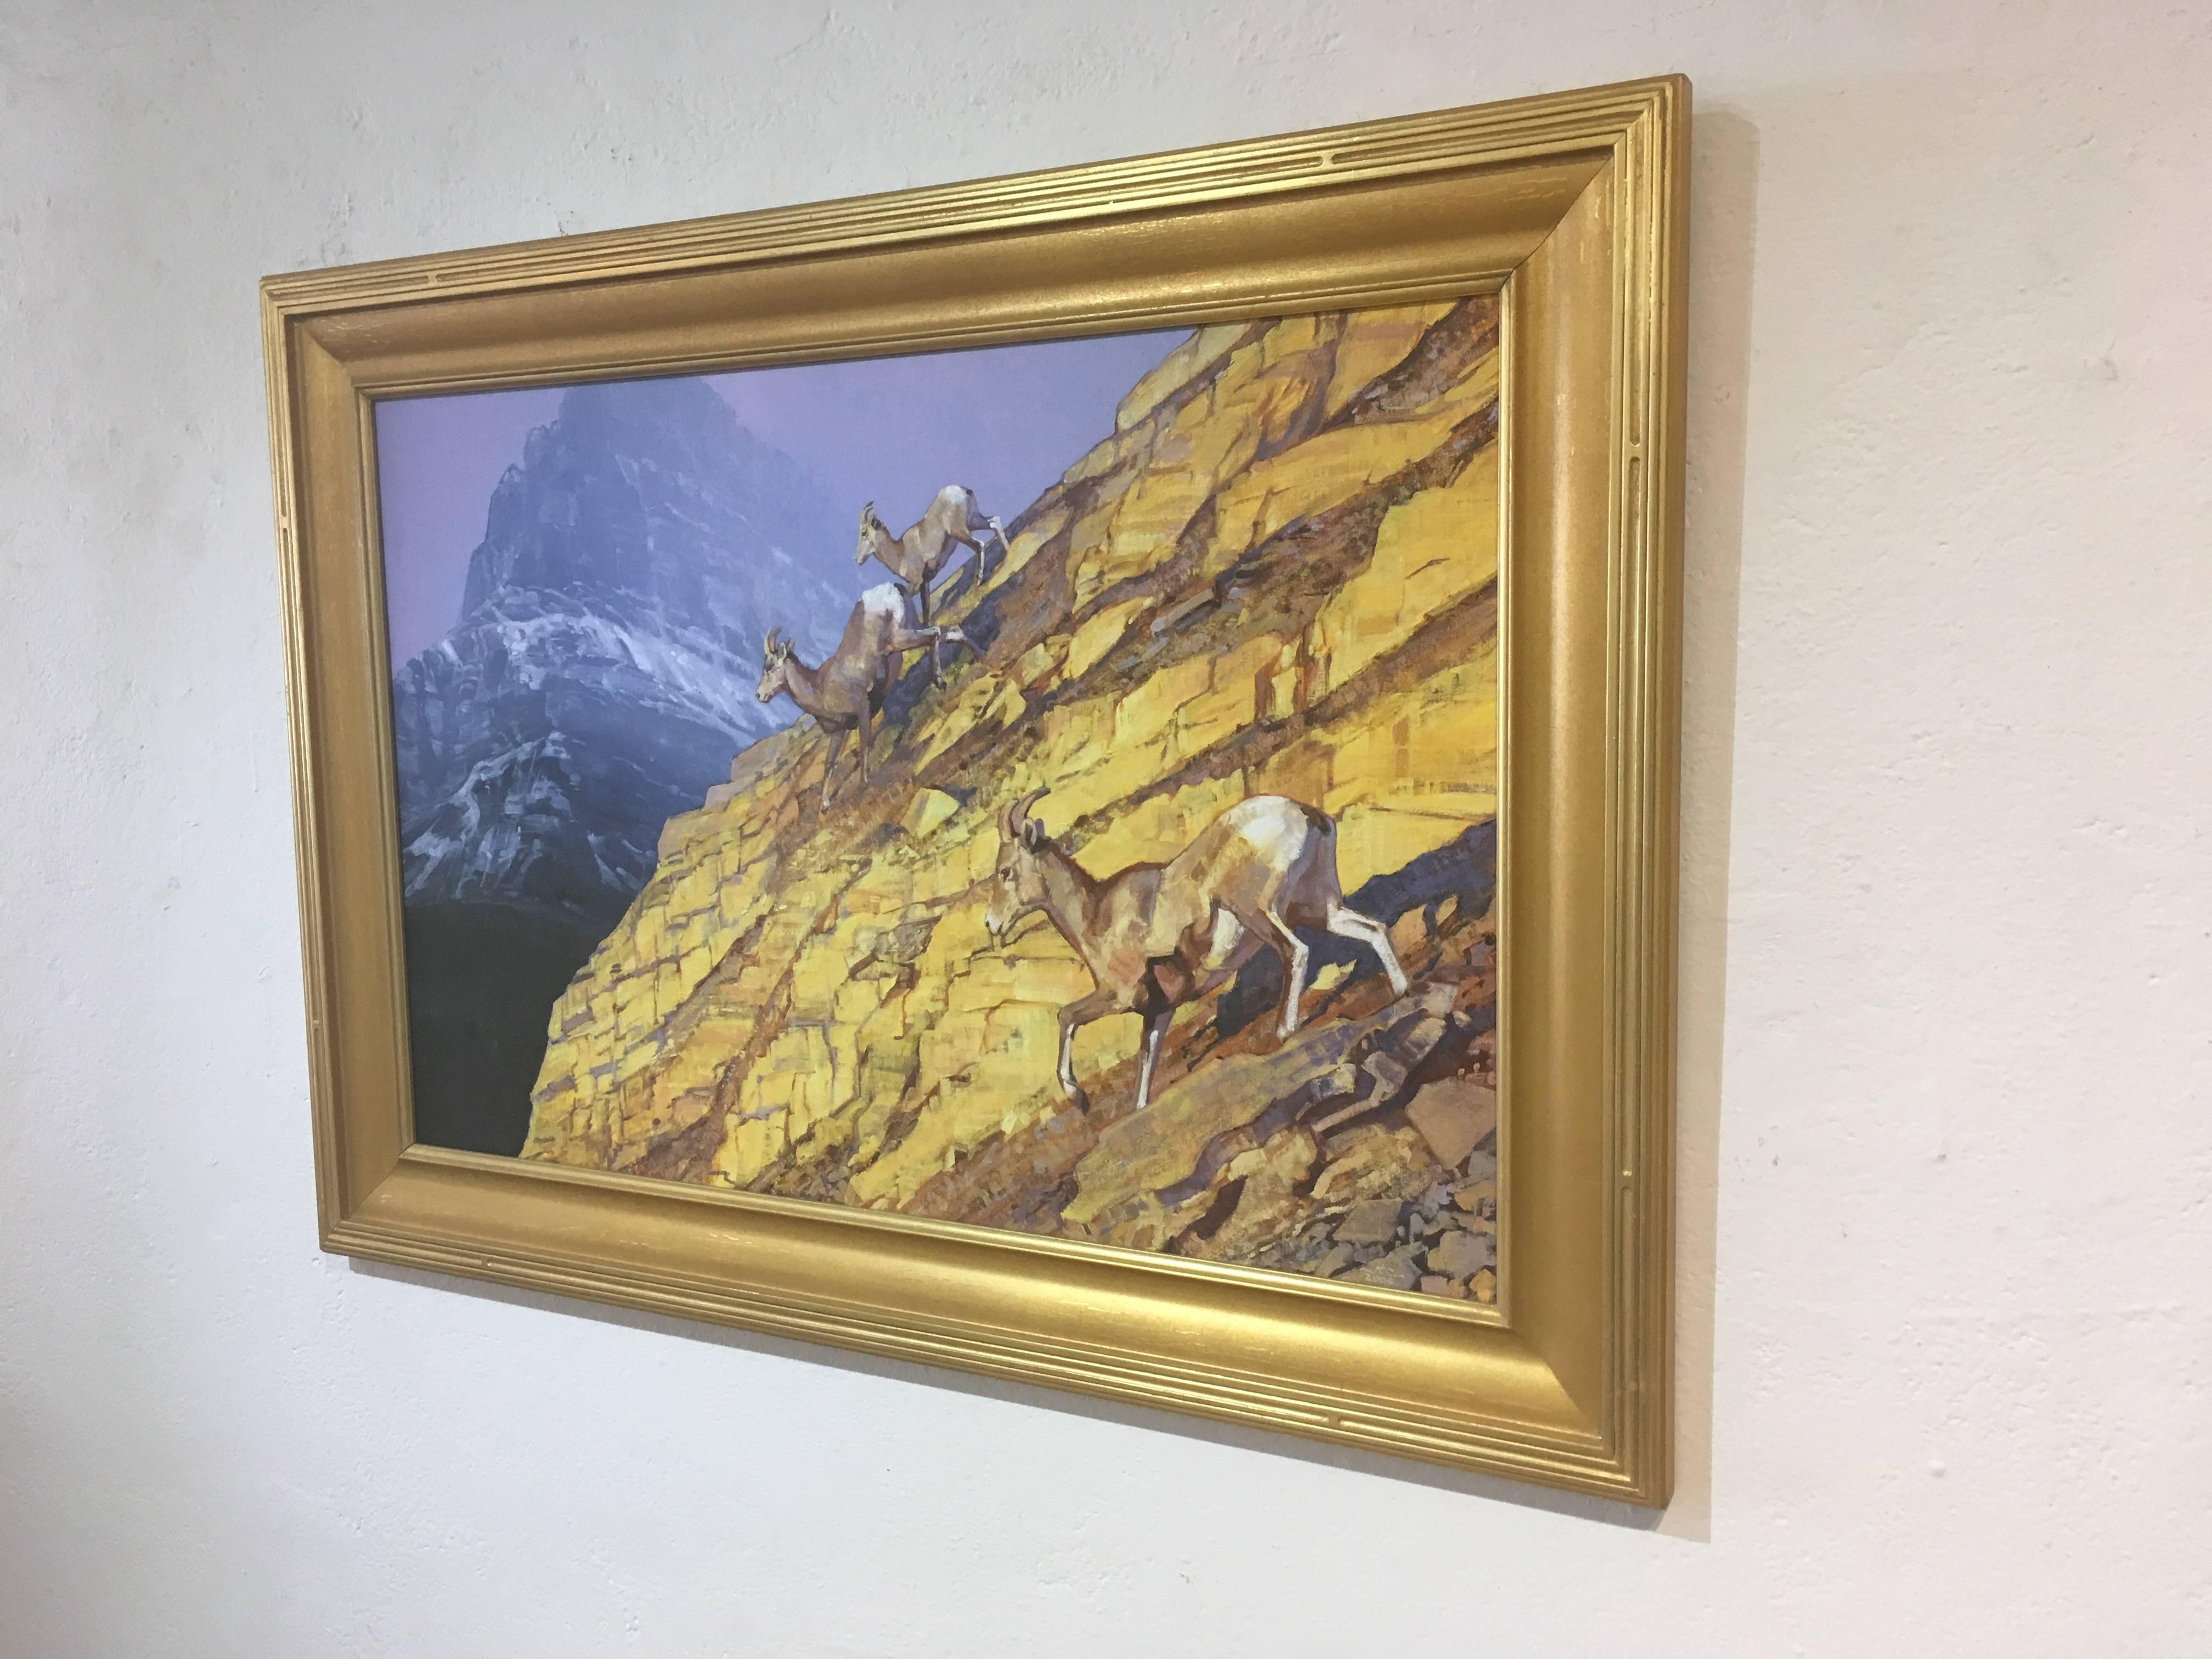 This is an oil painting of three rams scaling down a golden cliff face. The shadows are deep purples. As the rams move across the canvas, there is a sense of urgency. As they scale this beautiful light, a snowy, purple and blue mountain looms in the